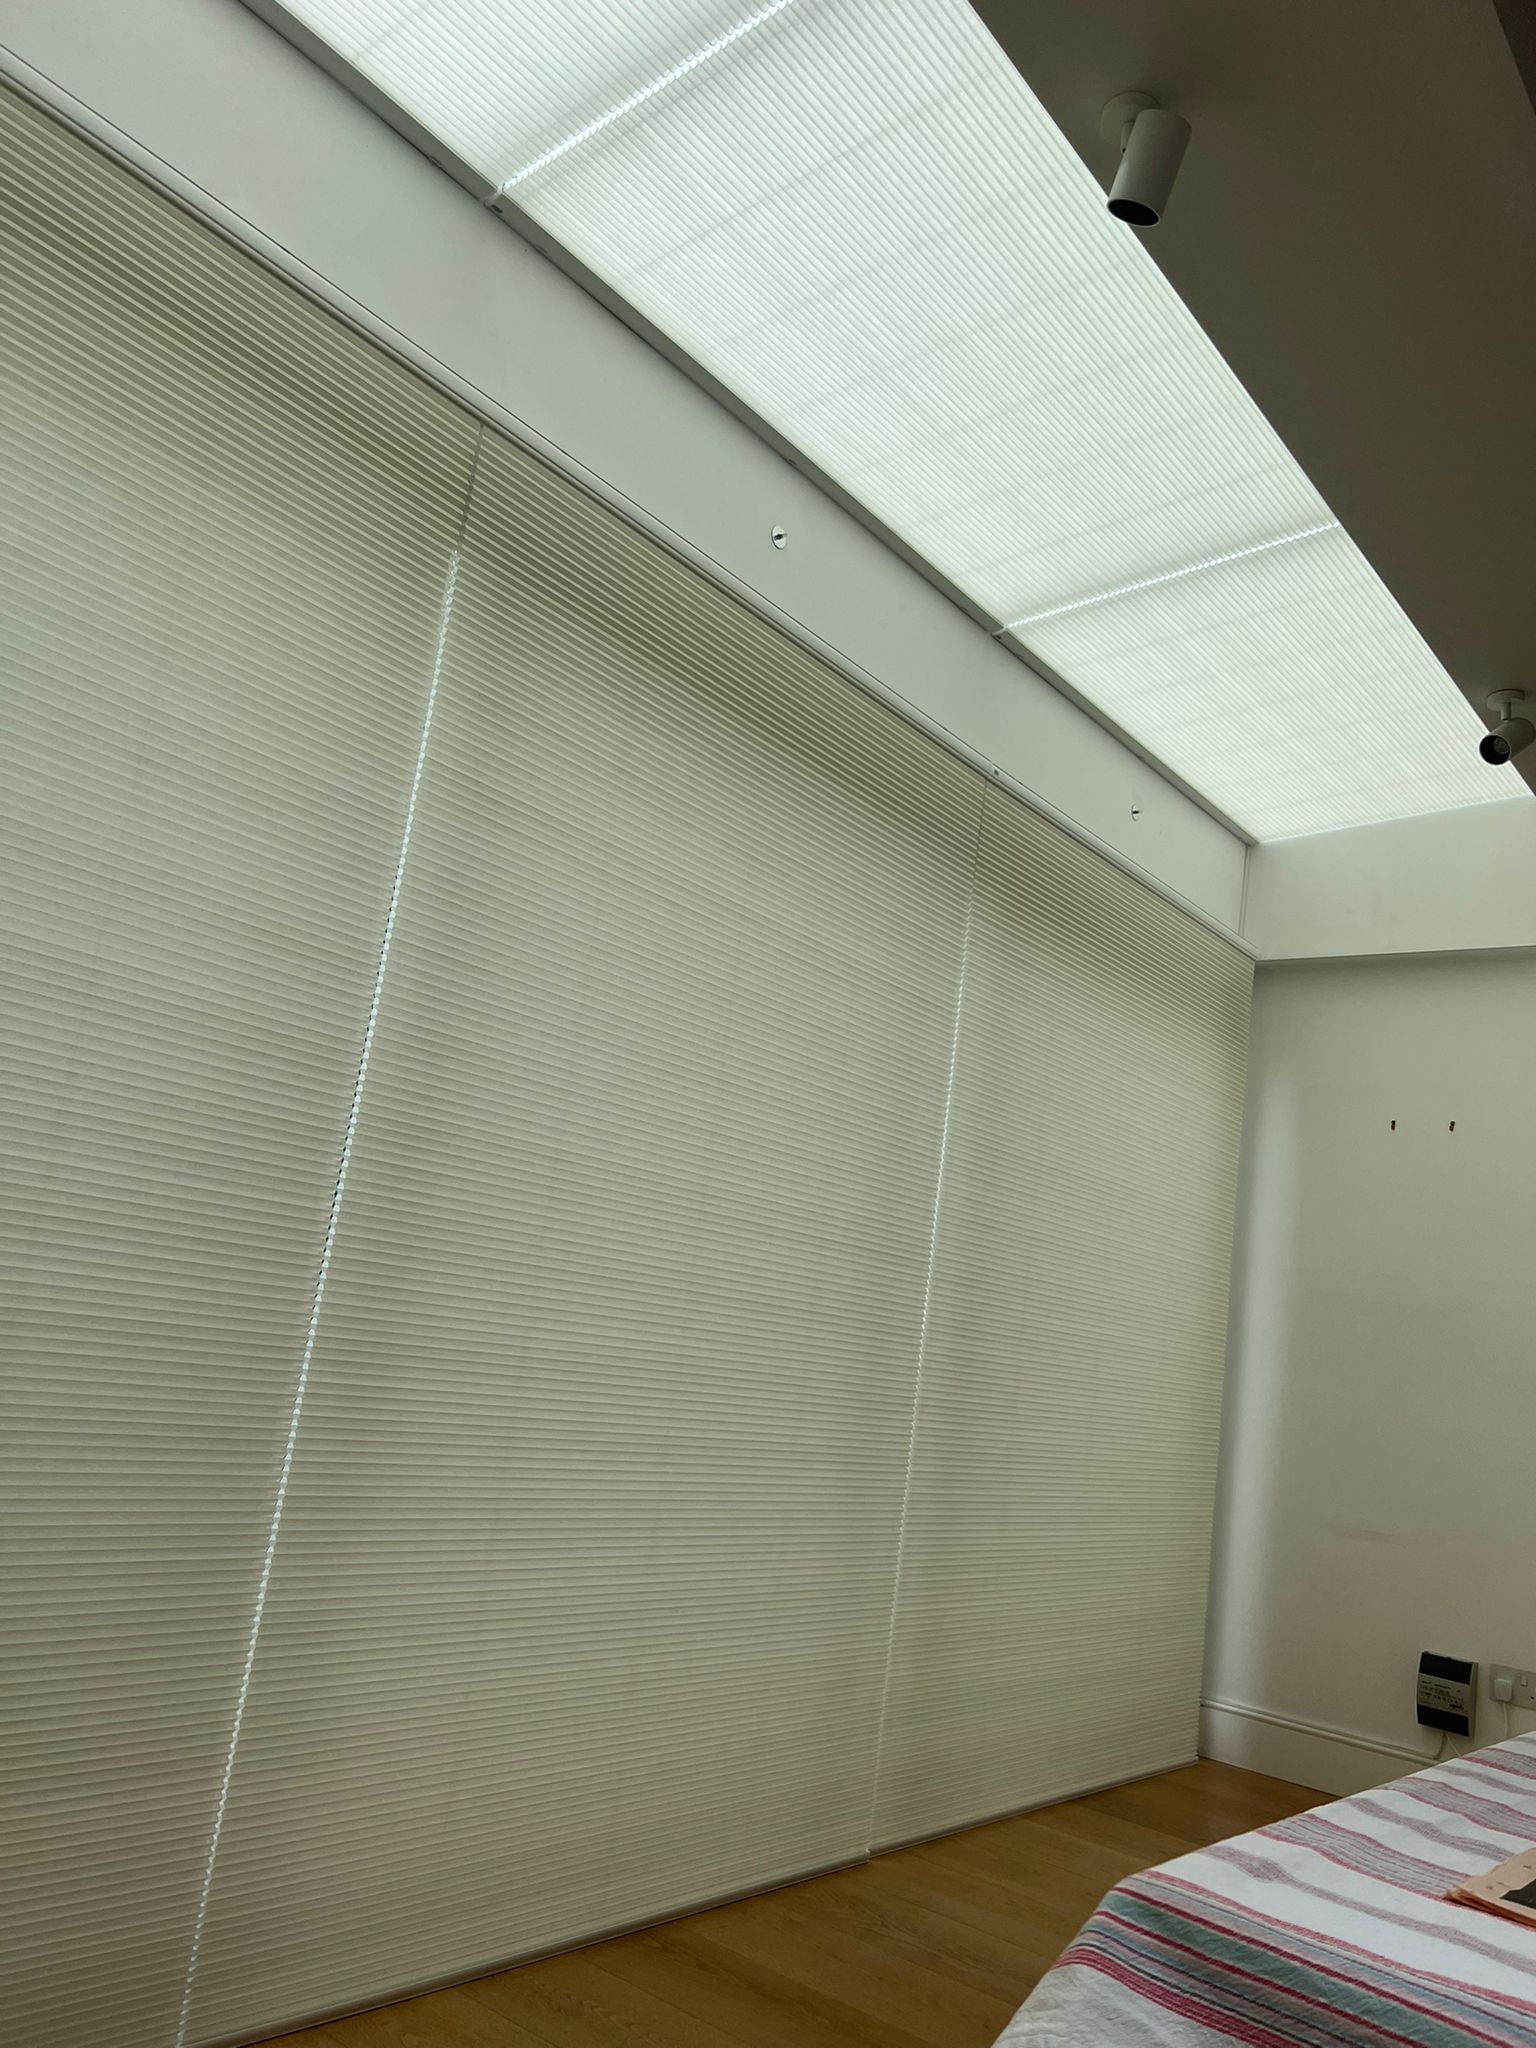 ULTRA Smart Honeycomb blinds on doors and roof